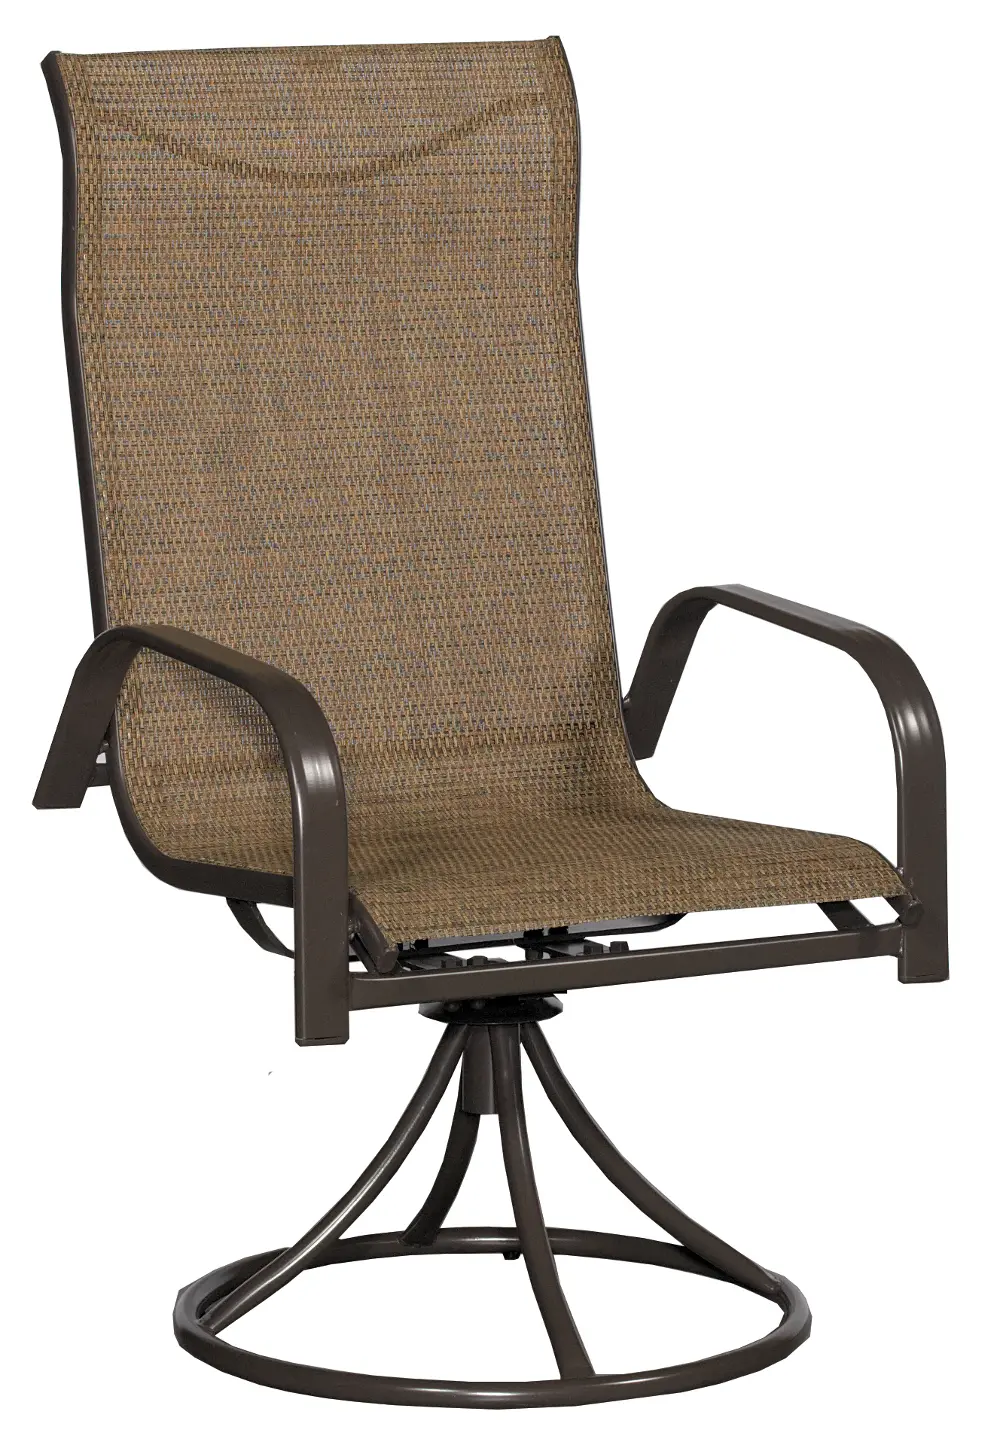 Outdoor Patio Swivel Chair - Mayfield-1